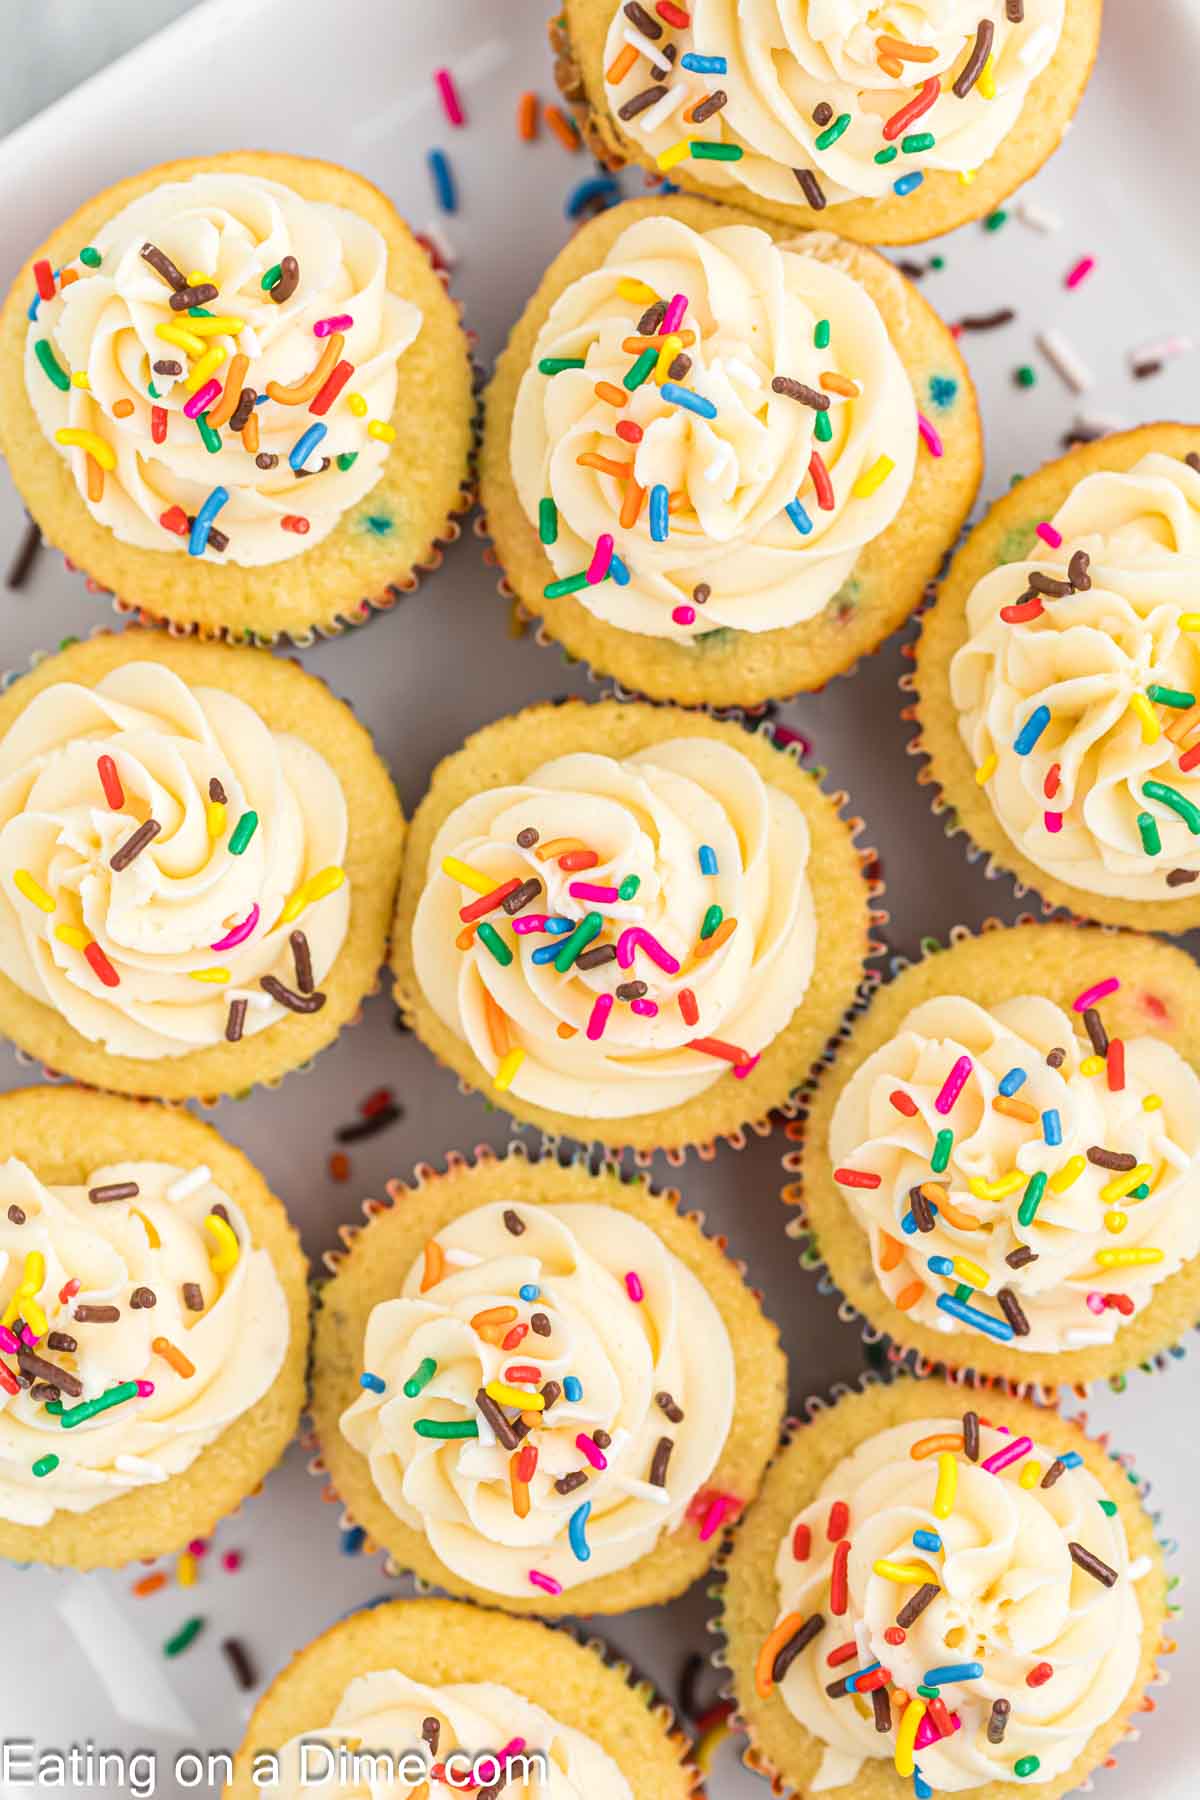 Close up image of funfetti cupcakes close together on a plate